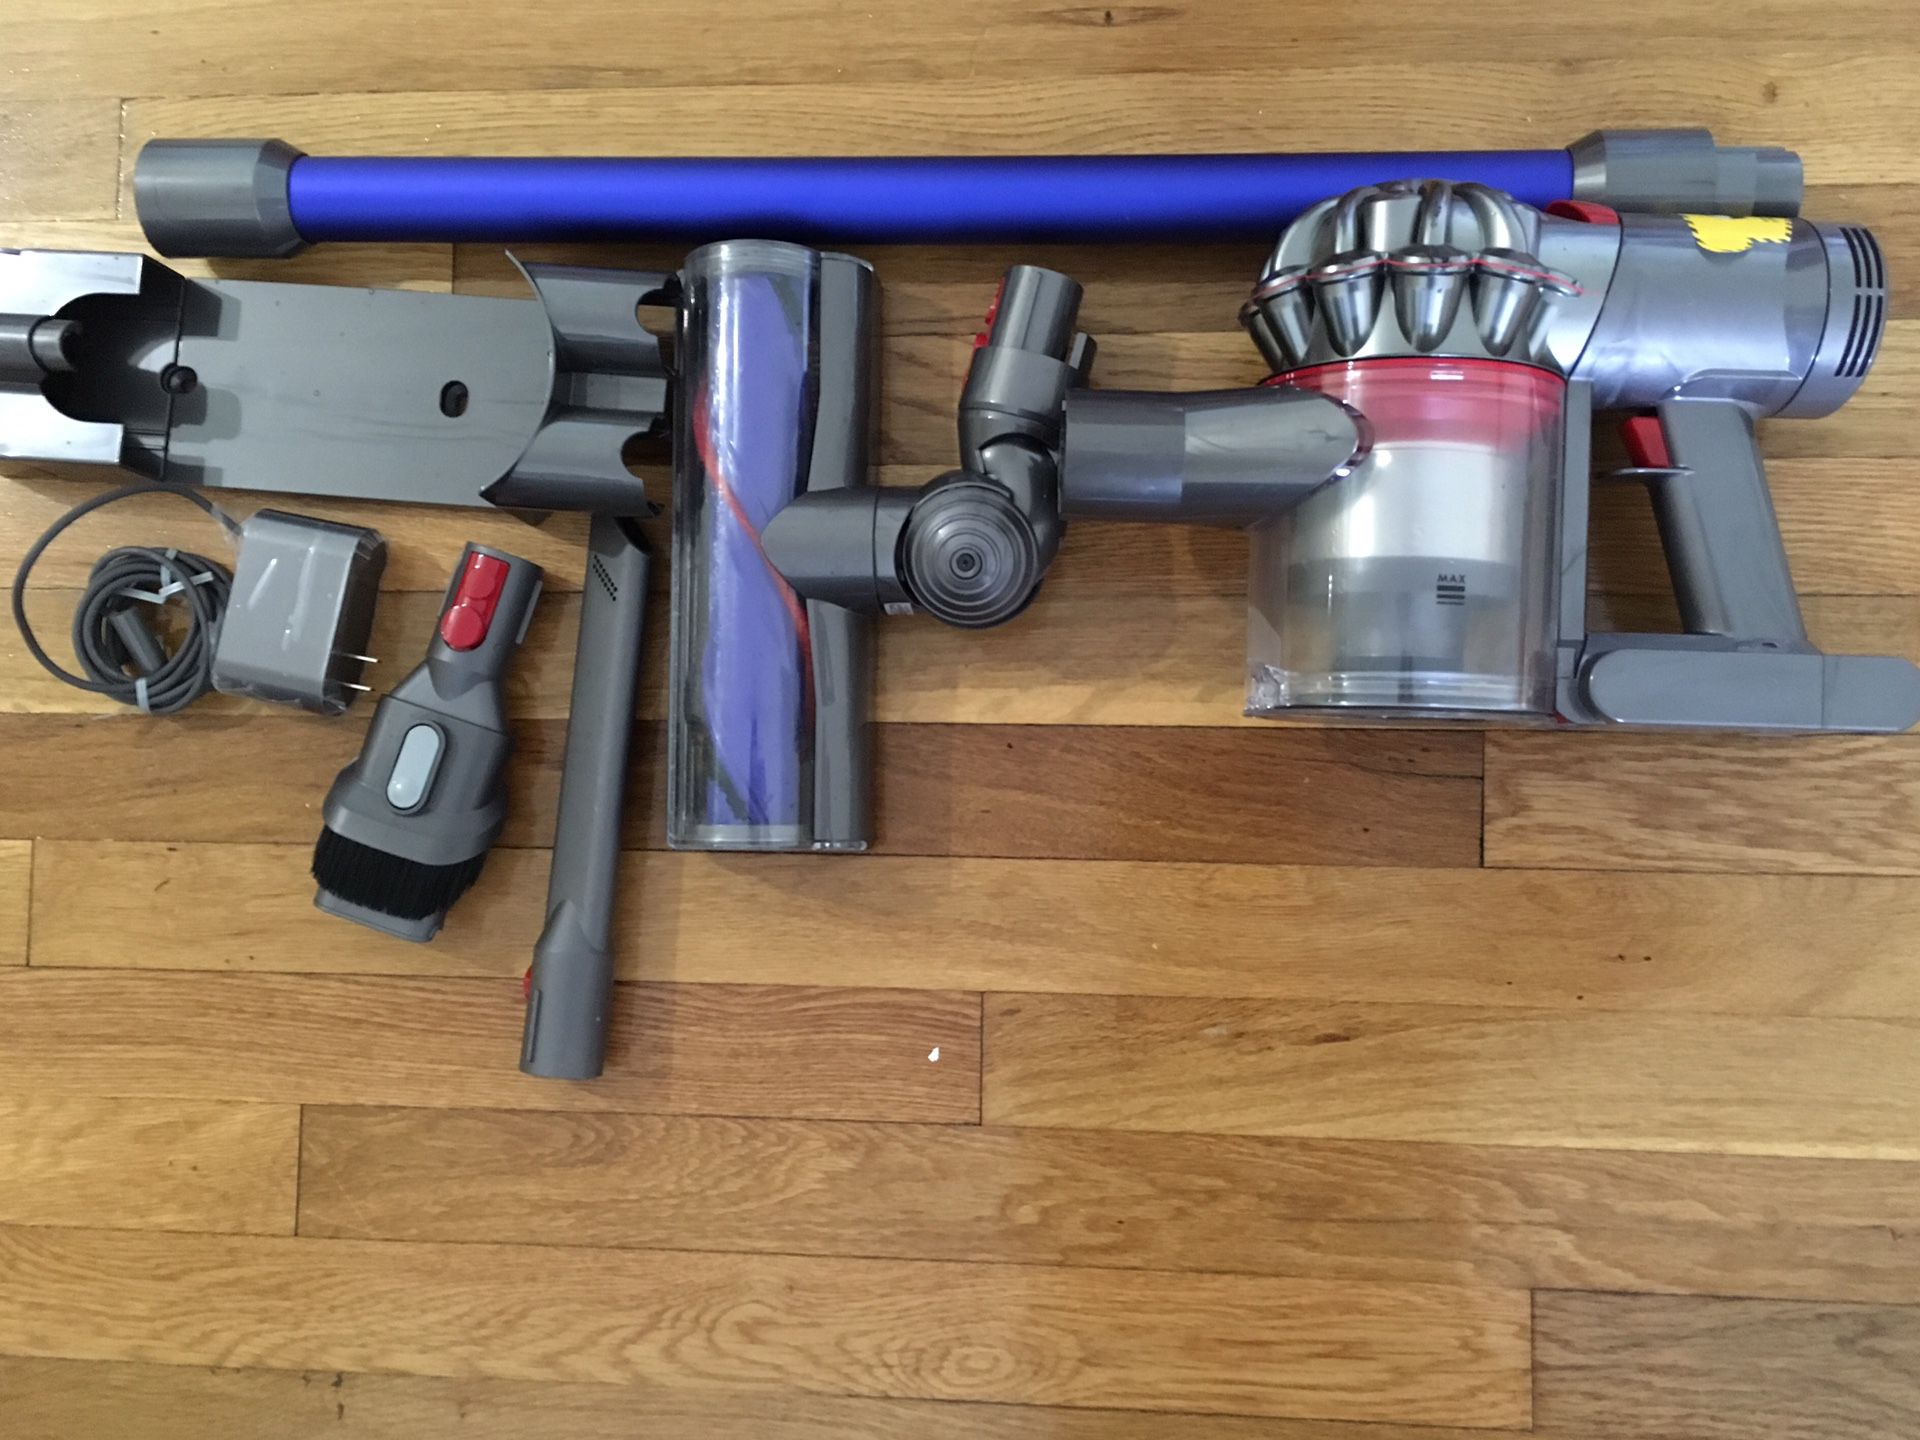 Dyson v7 motorhead cordless vaccum cleaner - new ( without original box )